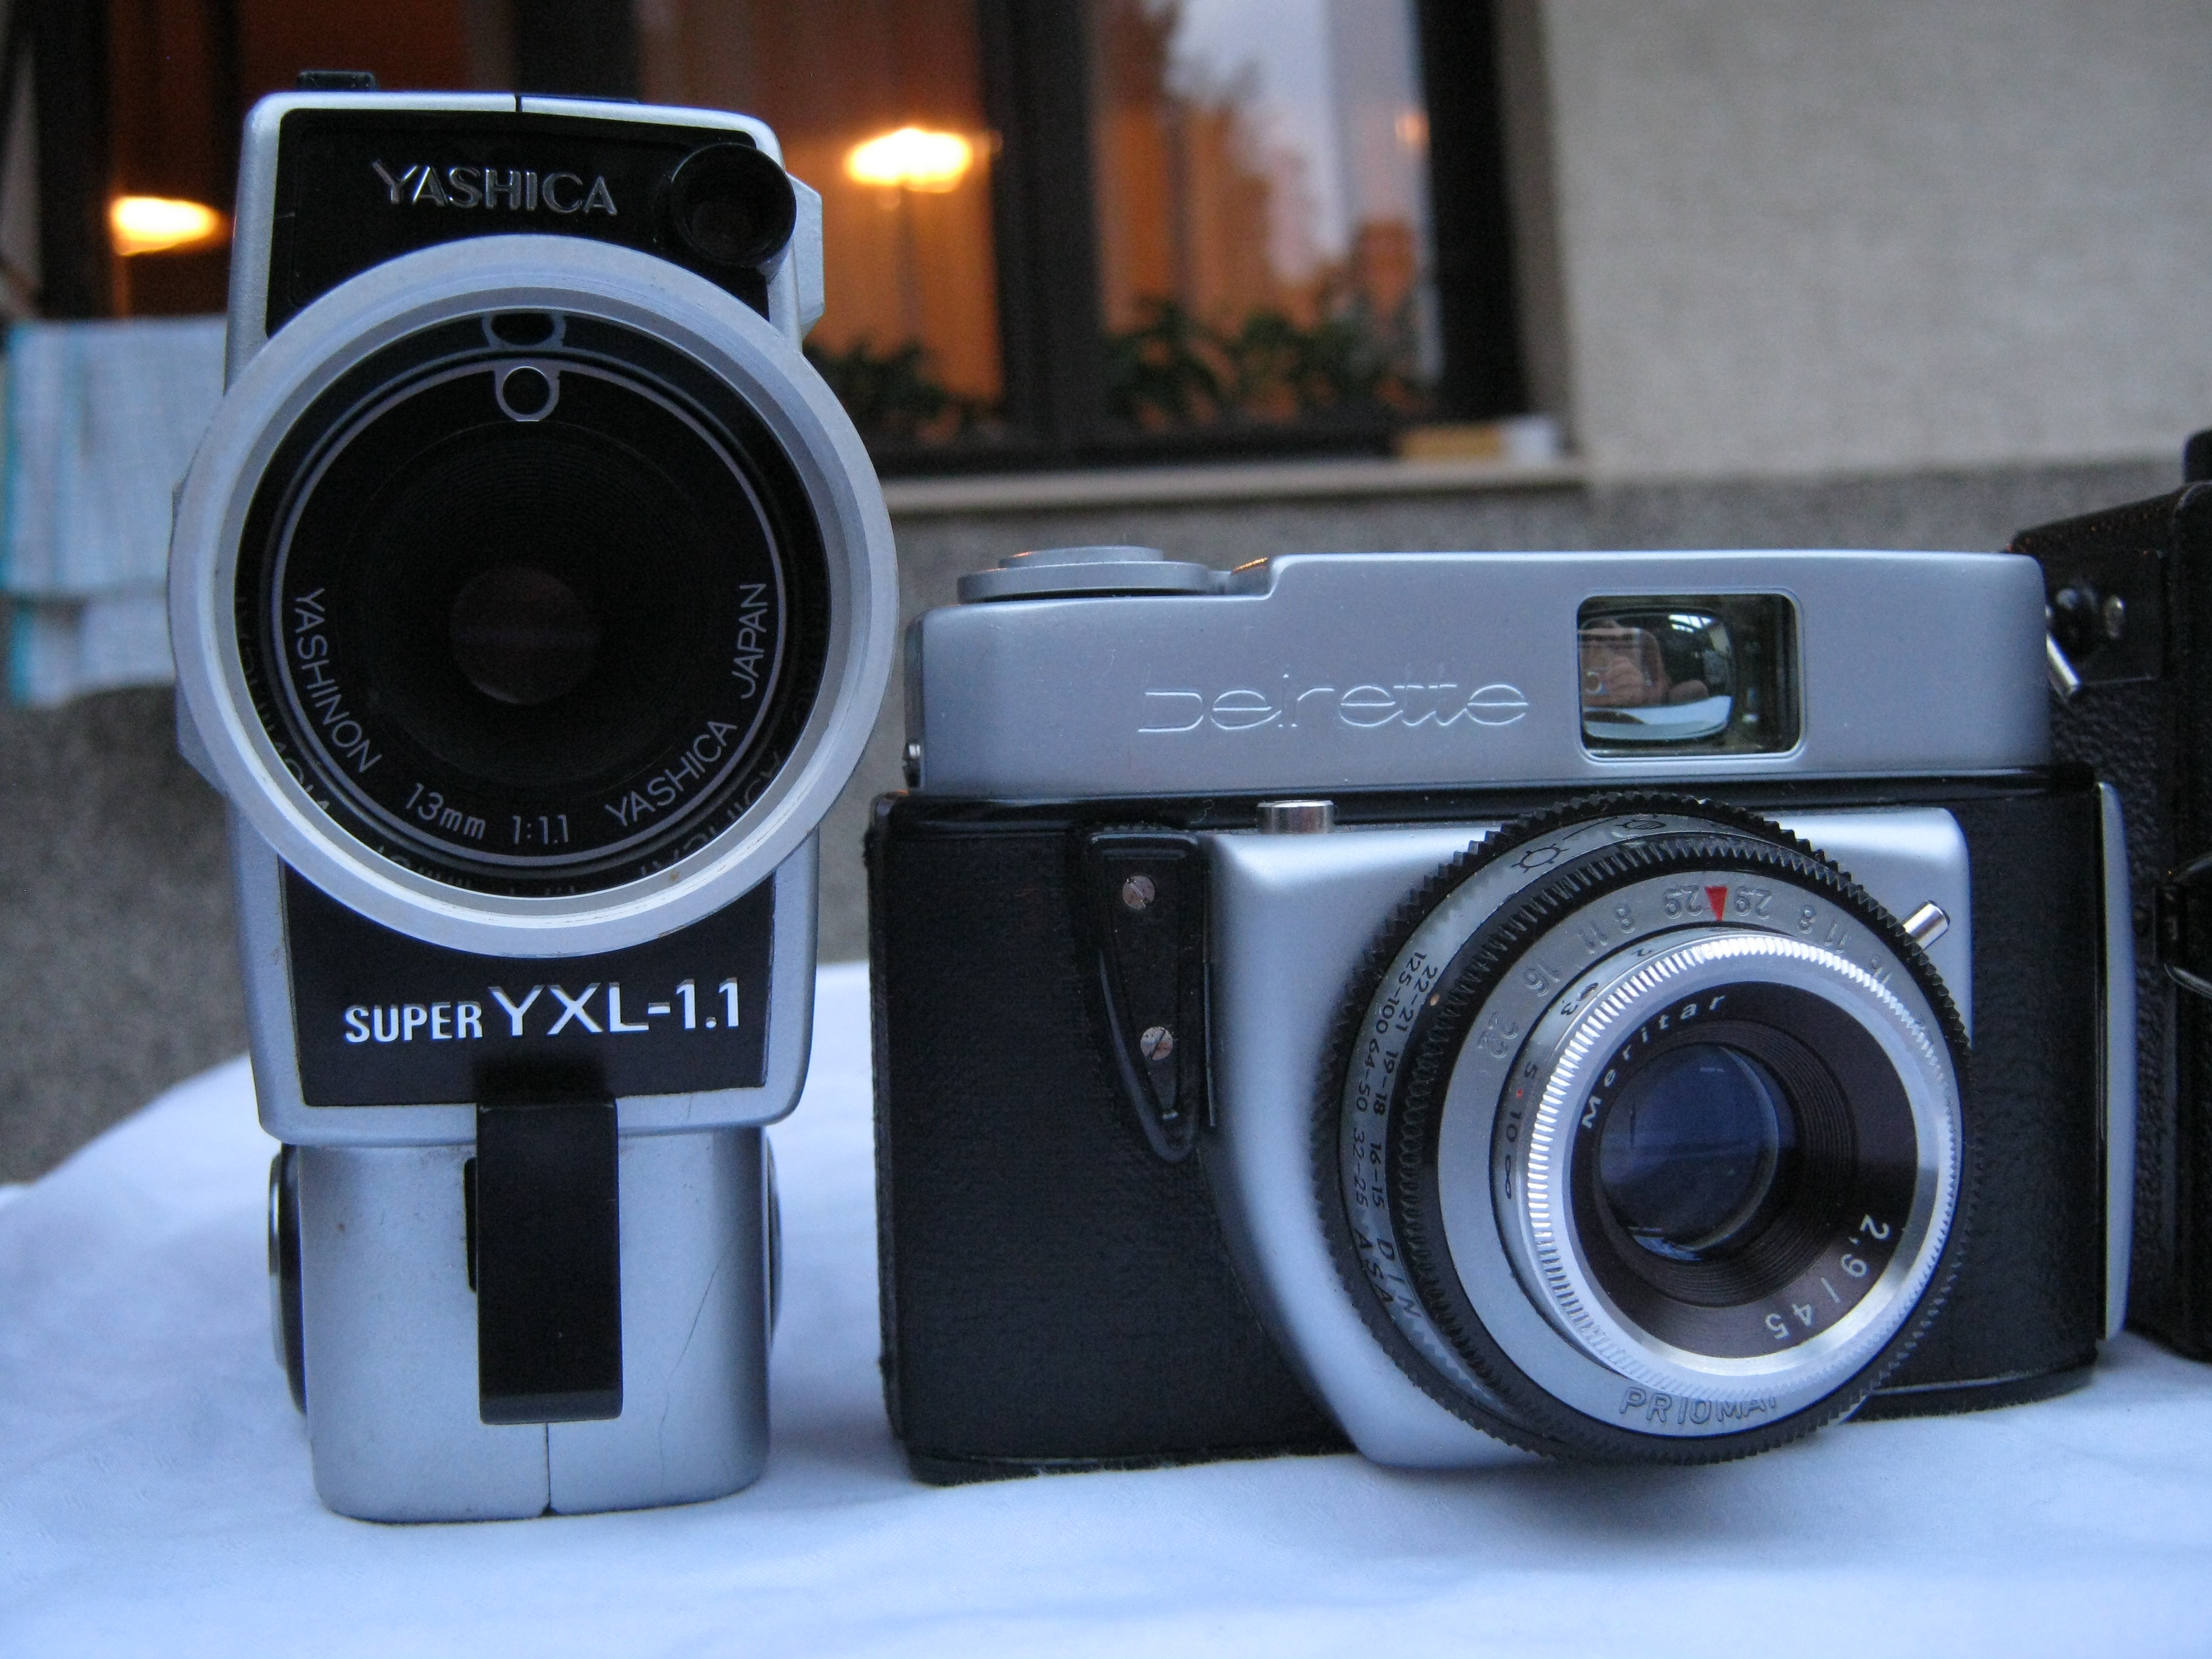 Yashica and Beirette 02